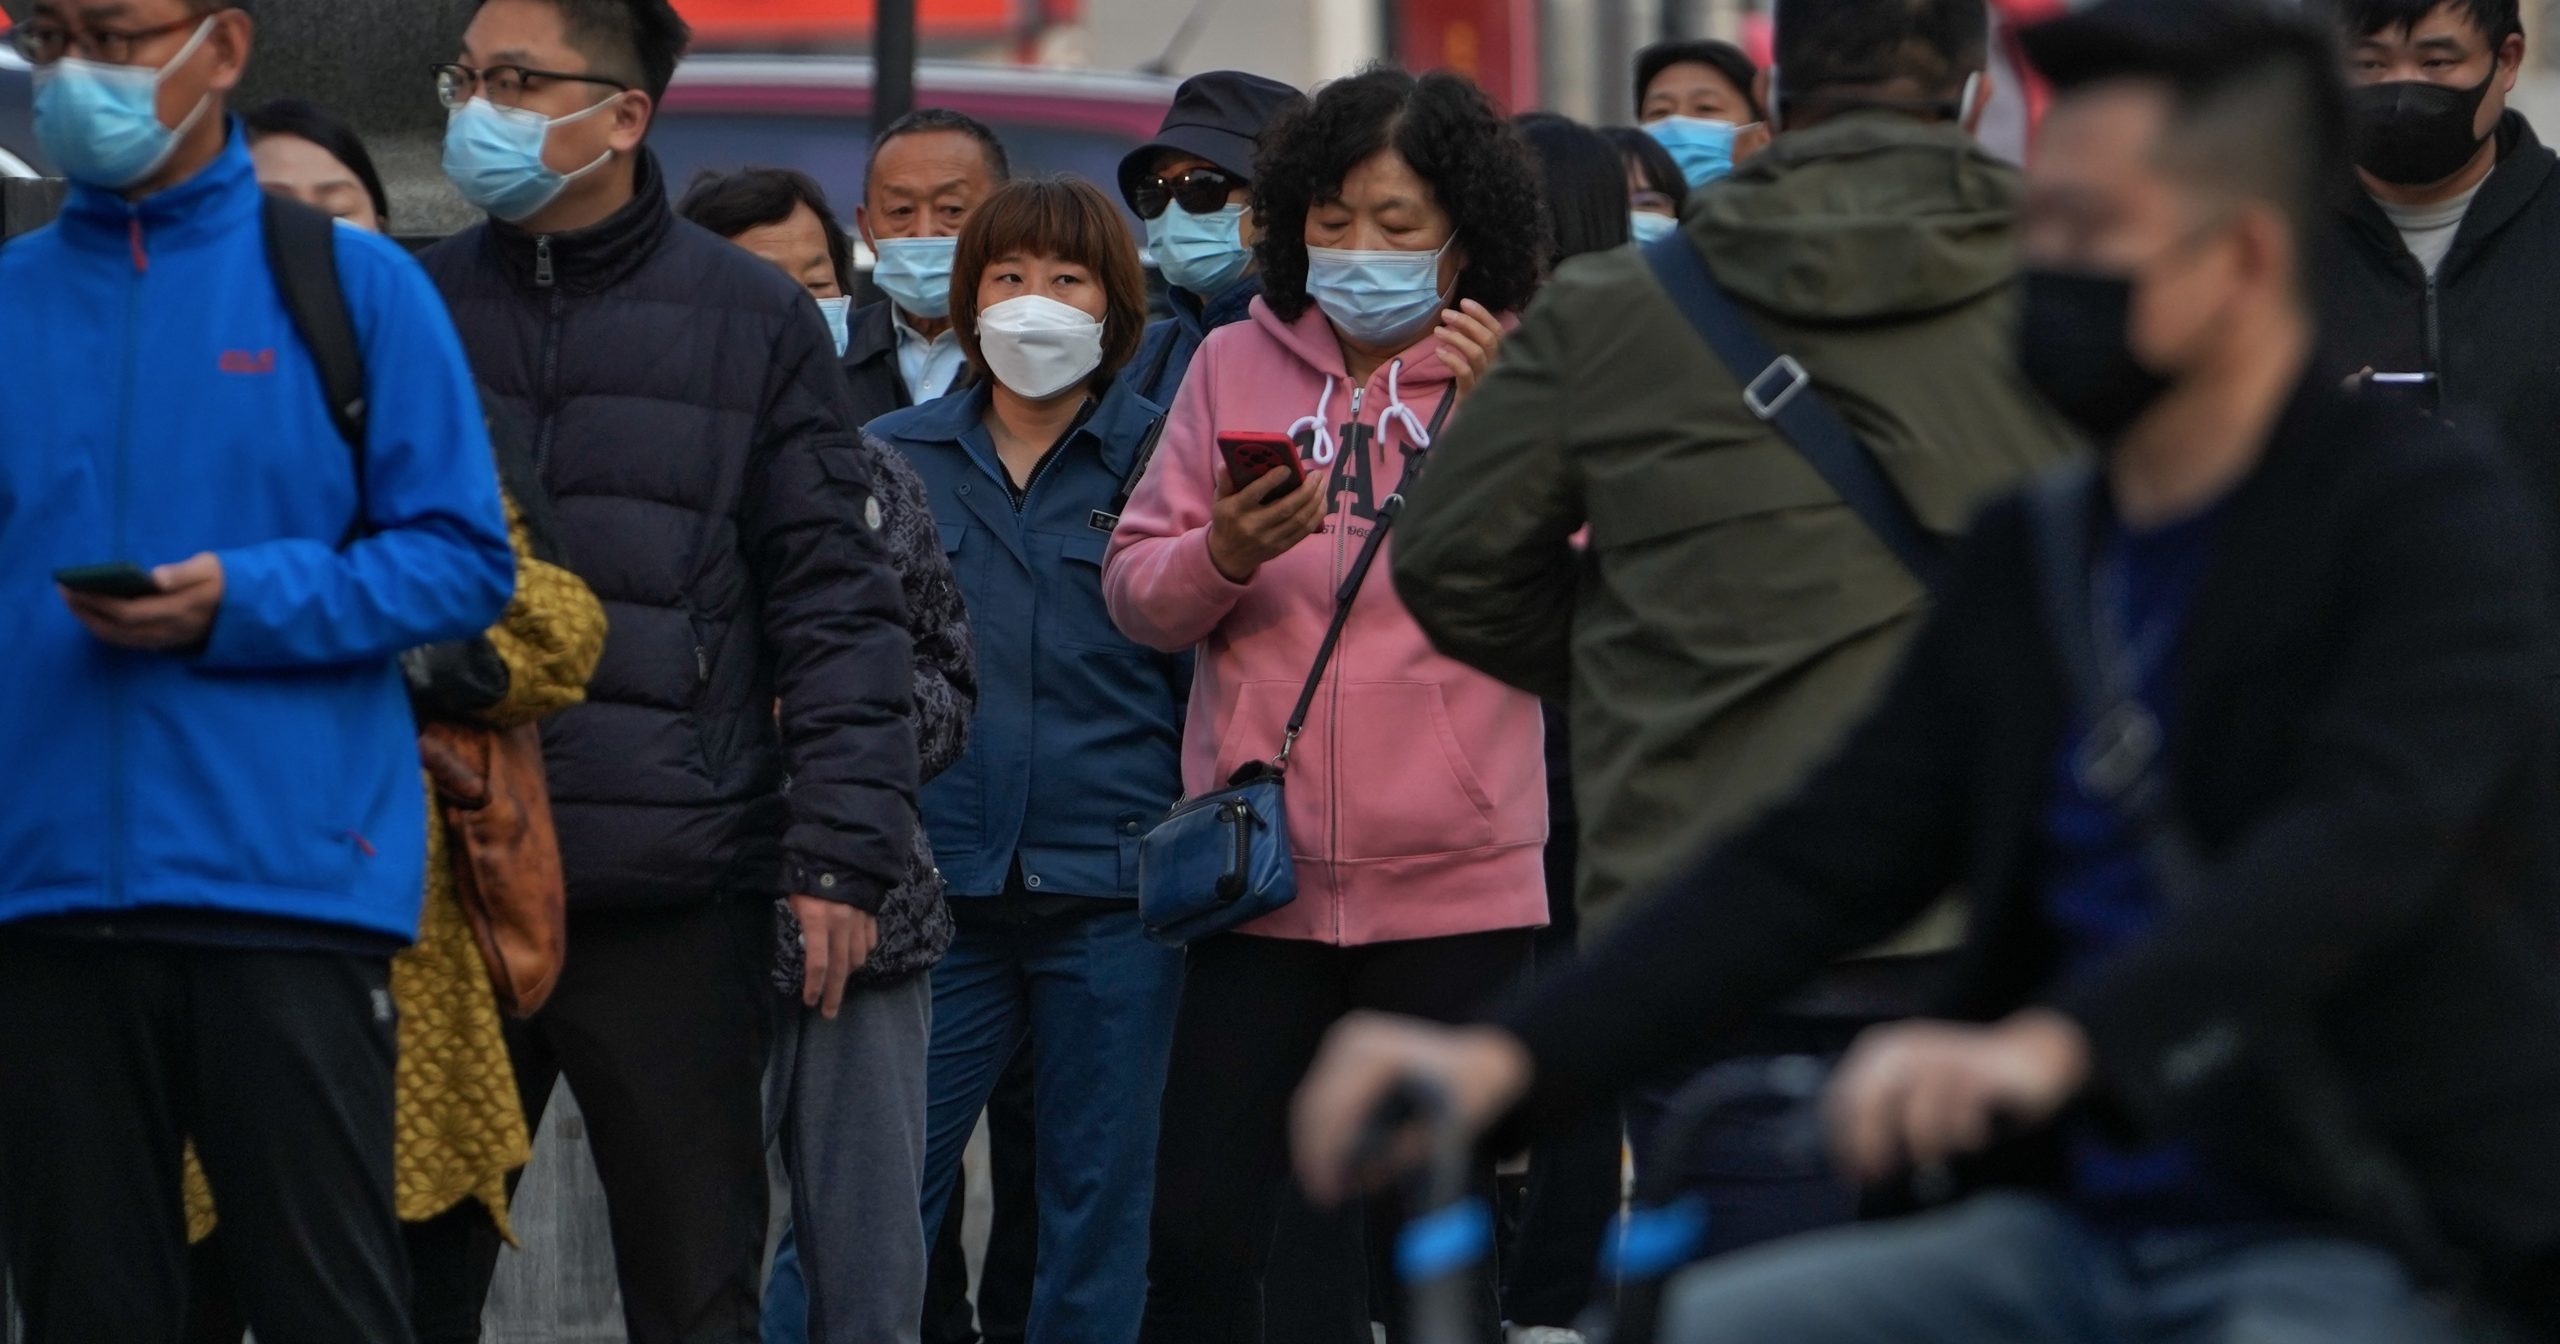 Residents wearing face masks wait in line to get their routine COVID-19 throat swabs at a coronavirus testing site in Beijing, China, on Tuesday.